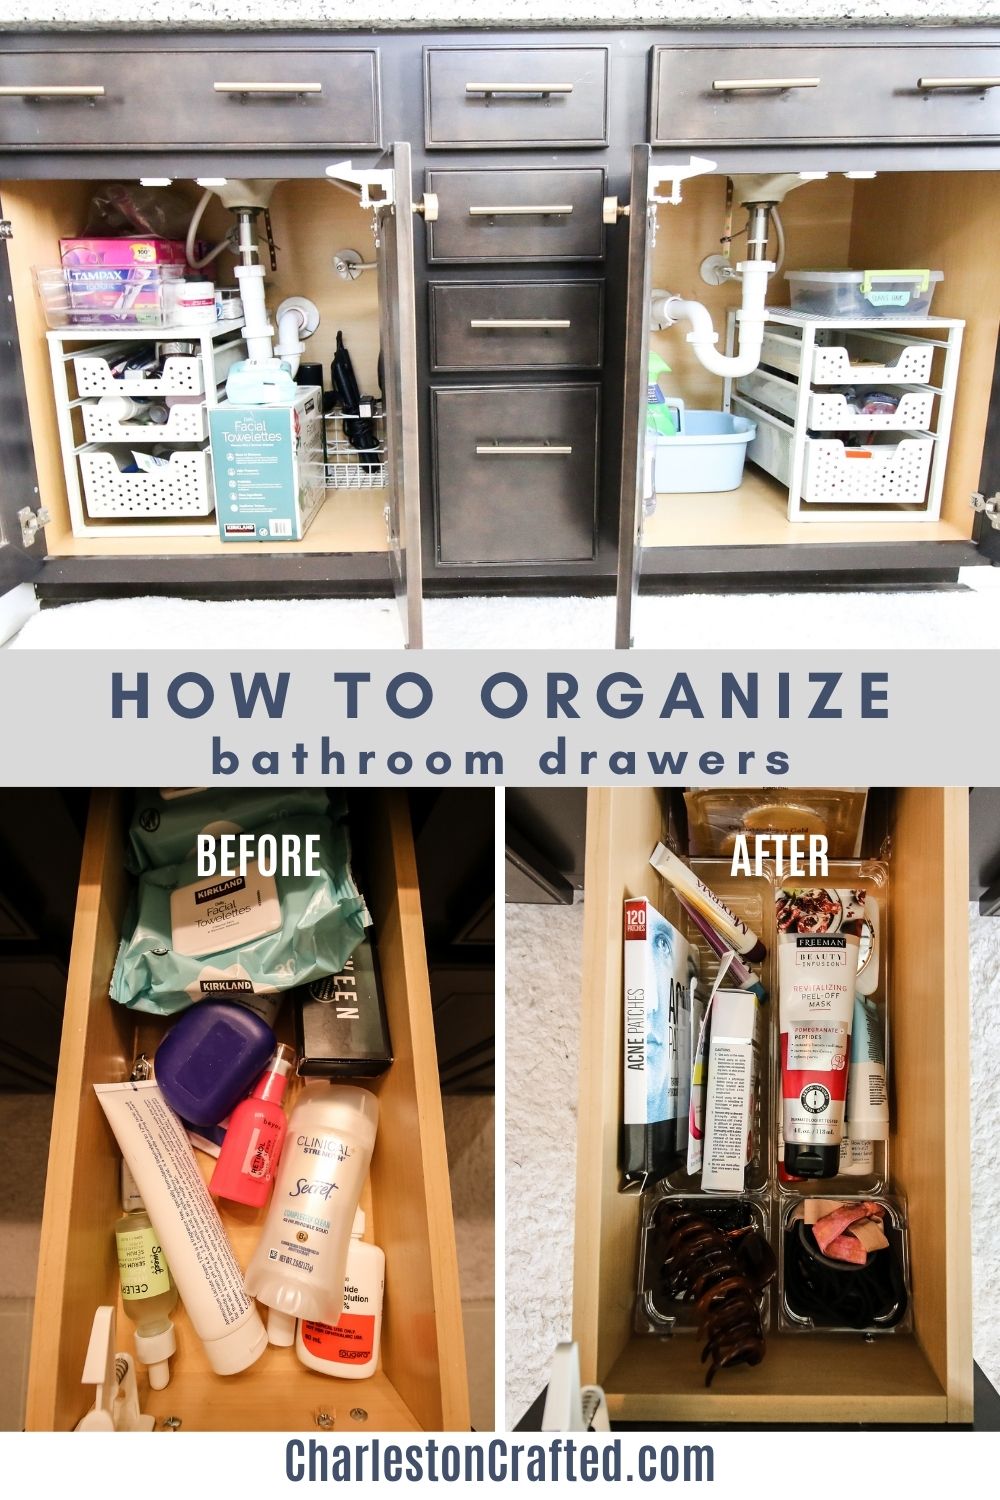 https://www.charlestoncrafted.com/wp-content/uploads/2022/01/how-to-organize-bathroom-drawers.jpg